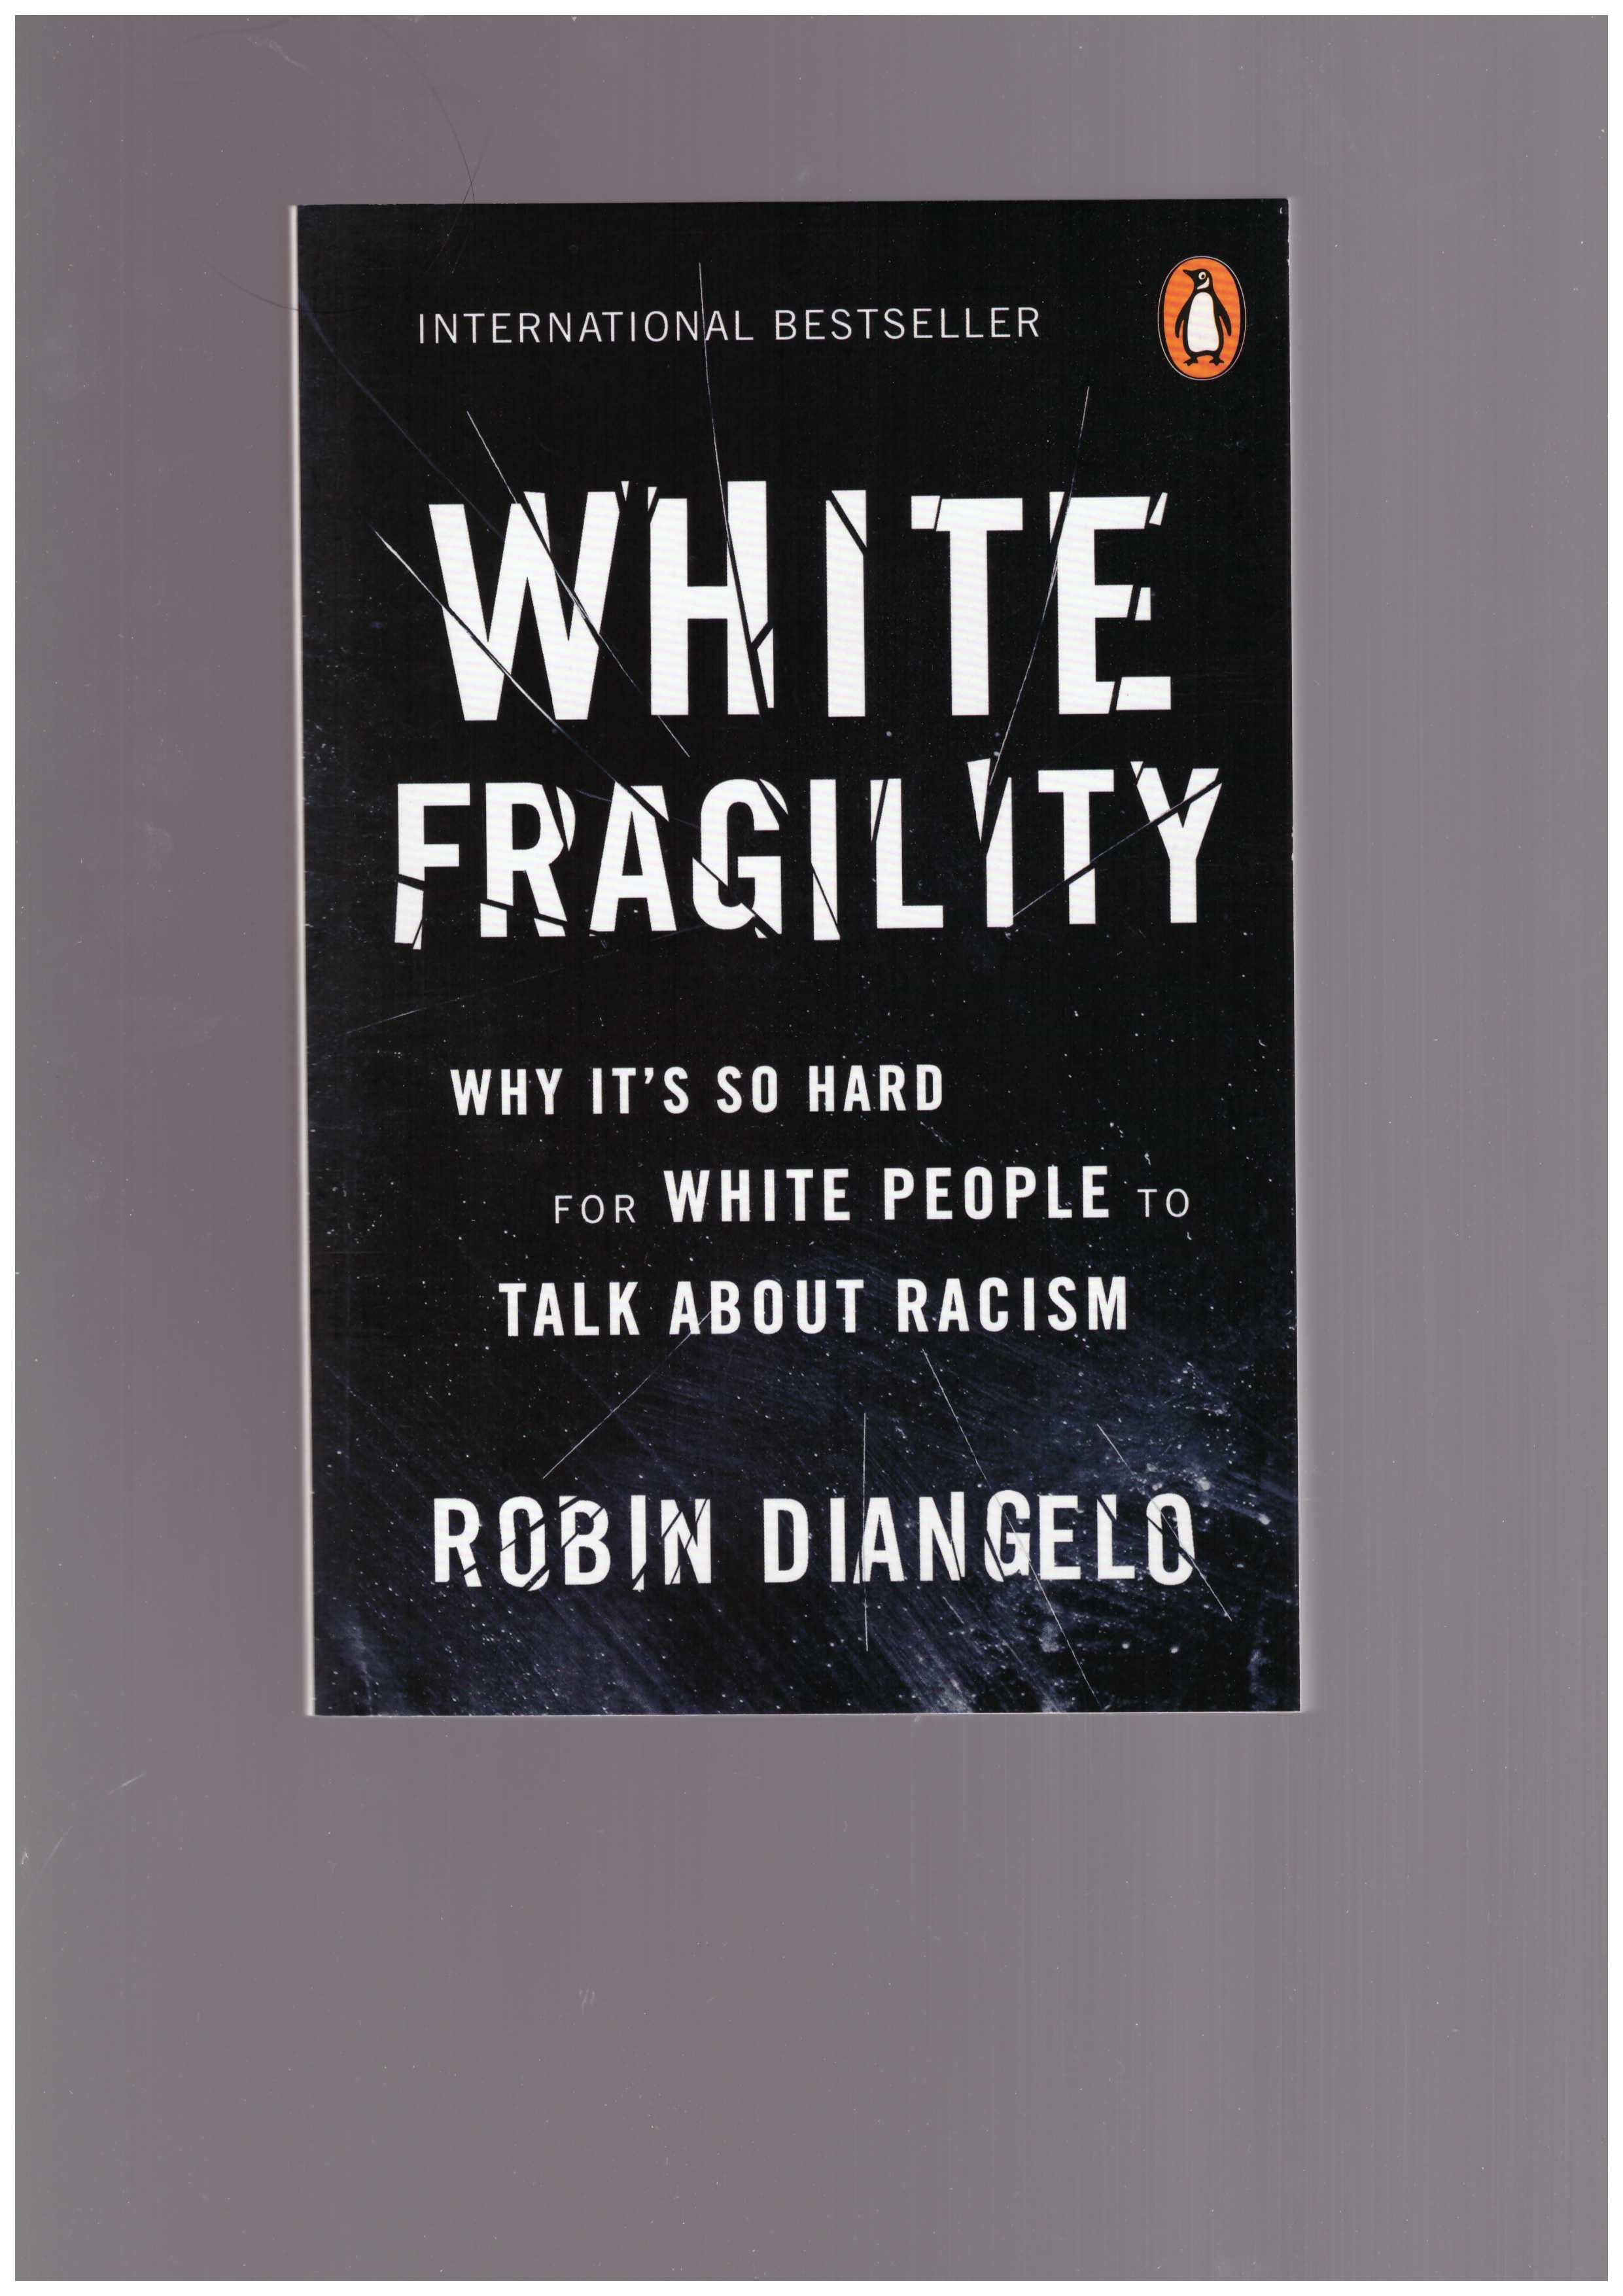 DI ANGELO, Robin  - White Fragility. Why it 's So Hard for White People to Talk About Racism